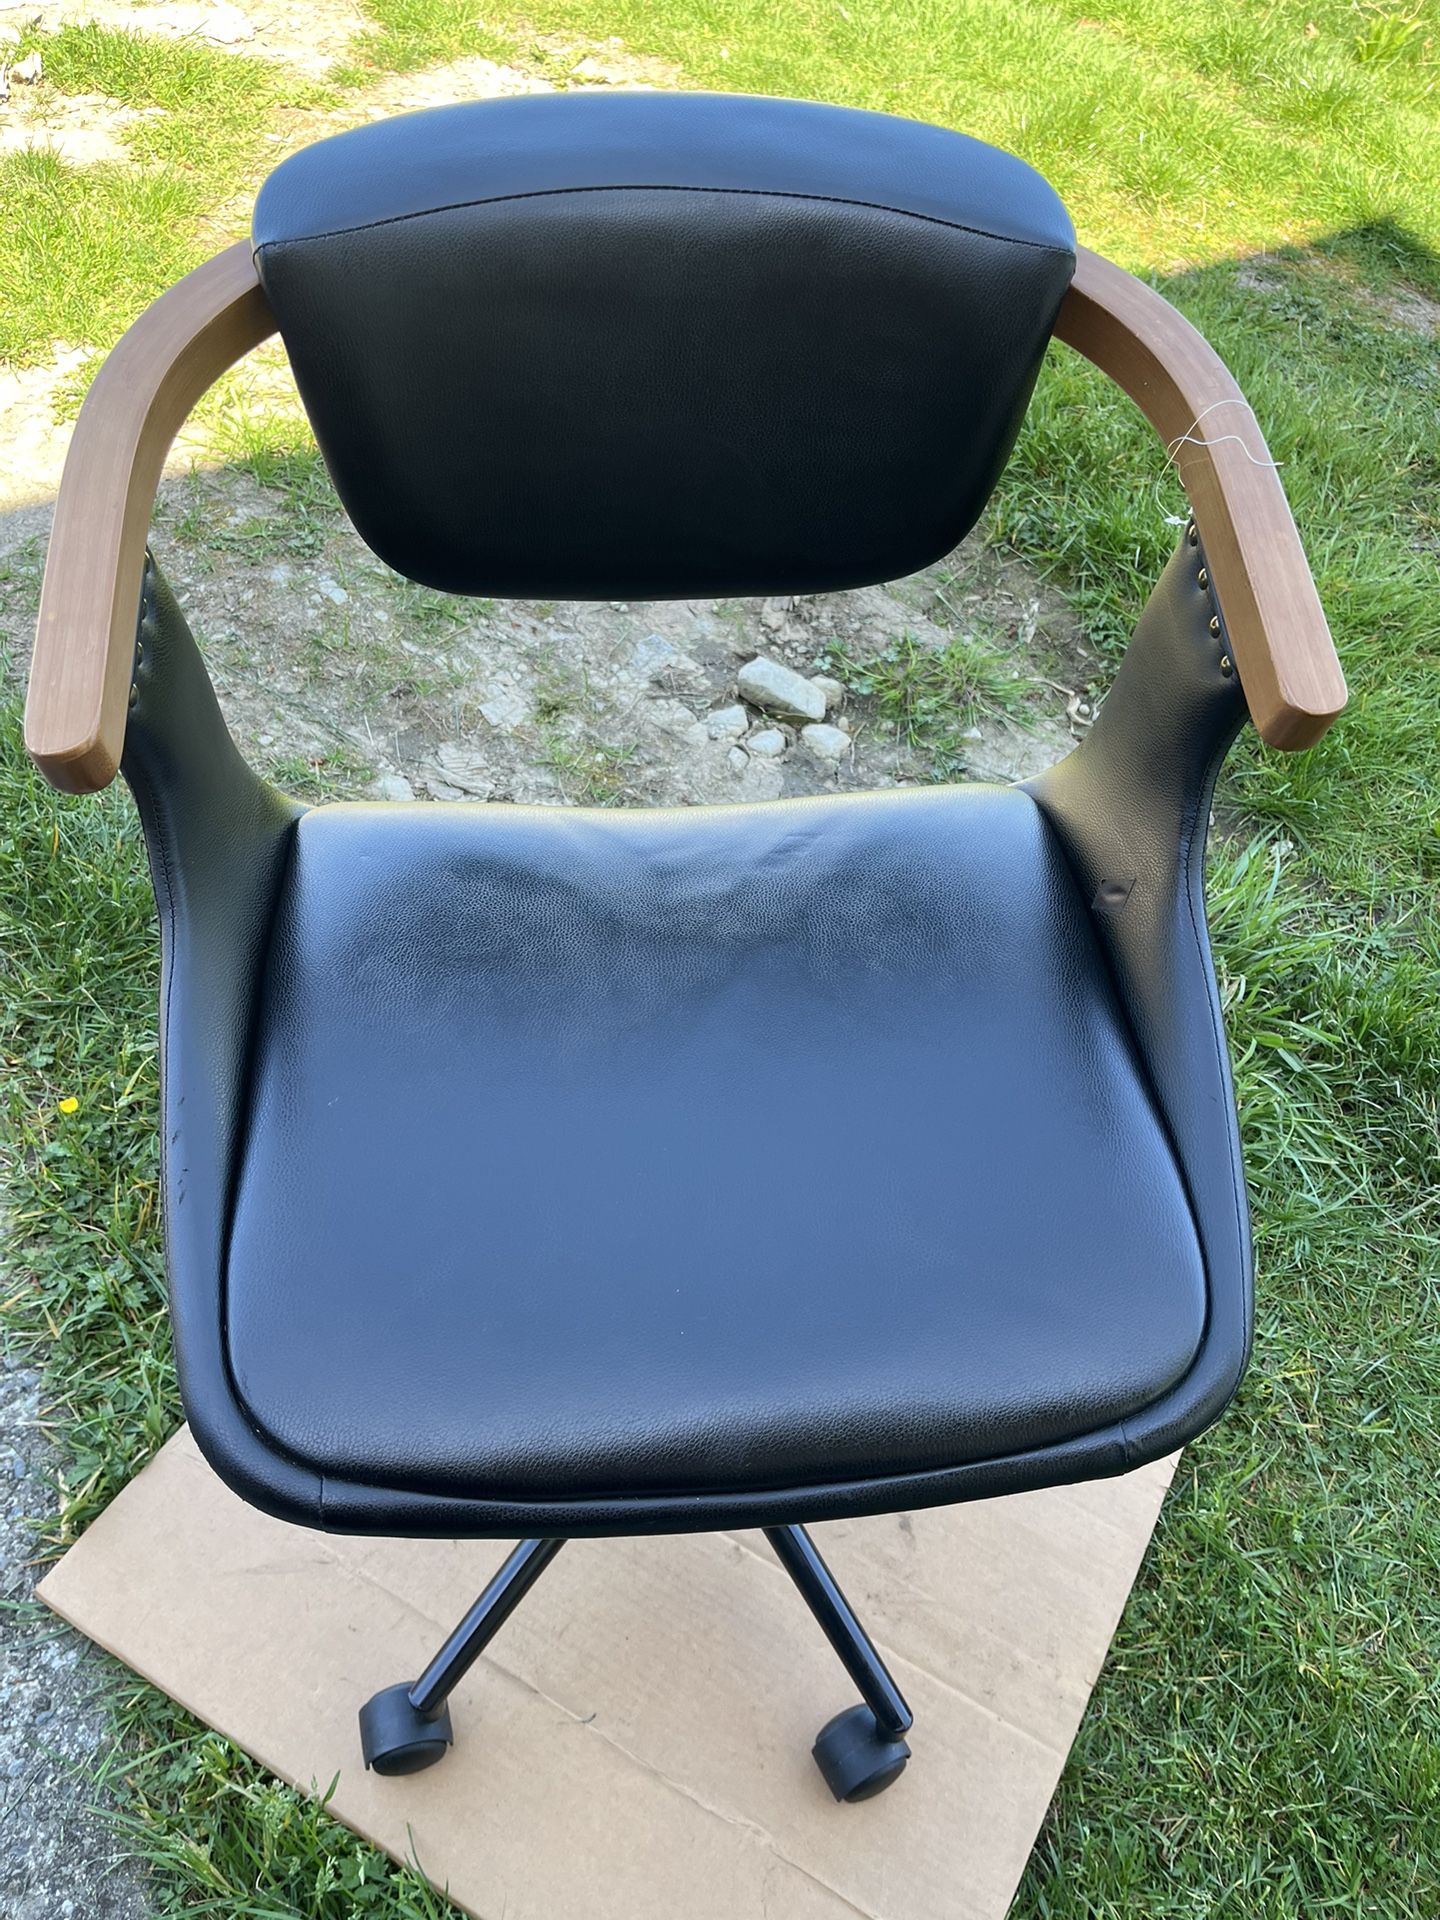 Chair office or home - adjustable height